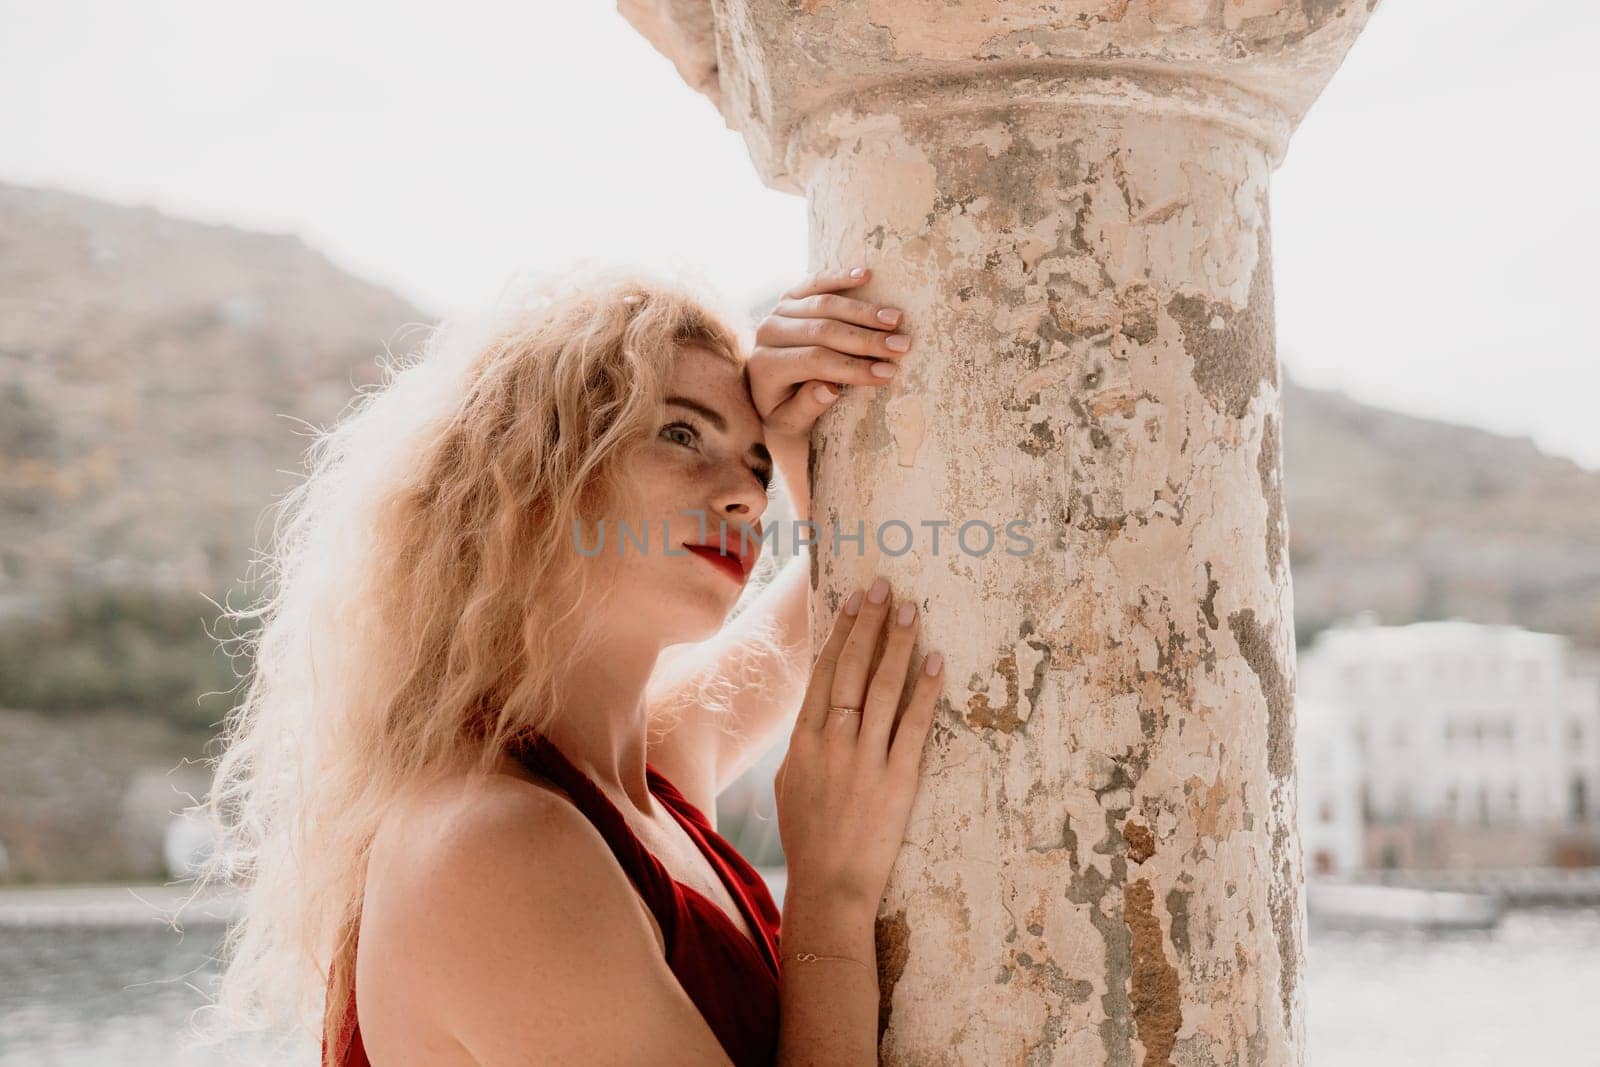 Redhead woman portrait. Curly redhead young caucasian woman with freckles looking at camera and smiling. Cute woman close up portrait in a red long dress posing on sea and travel city background by panophotograph